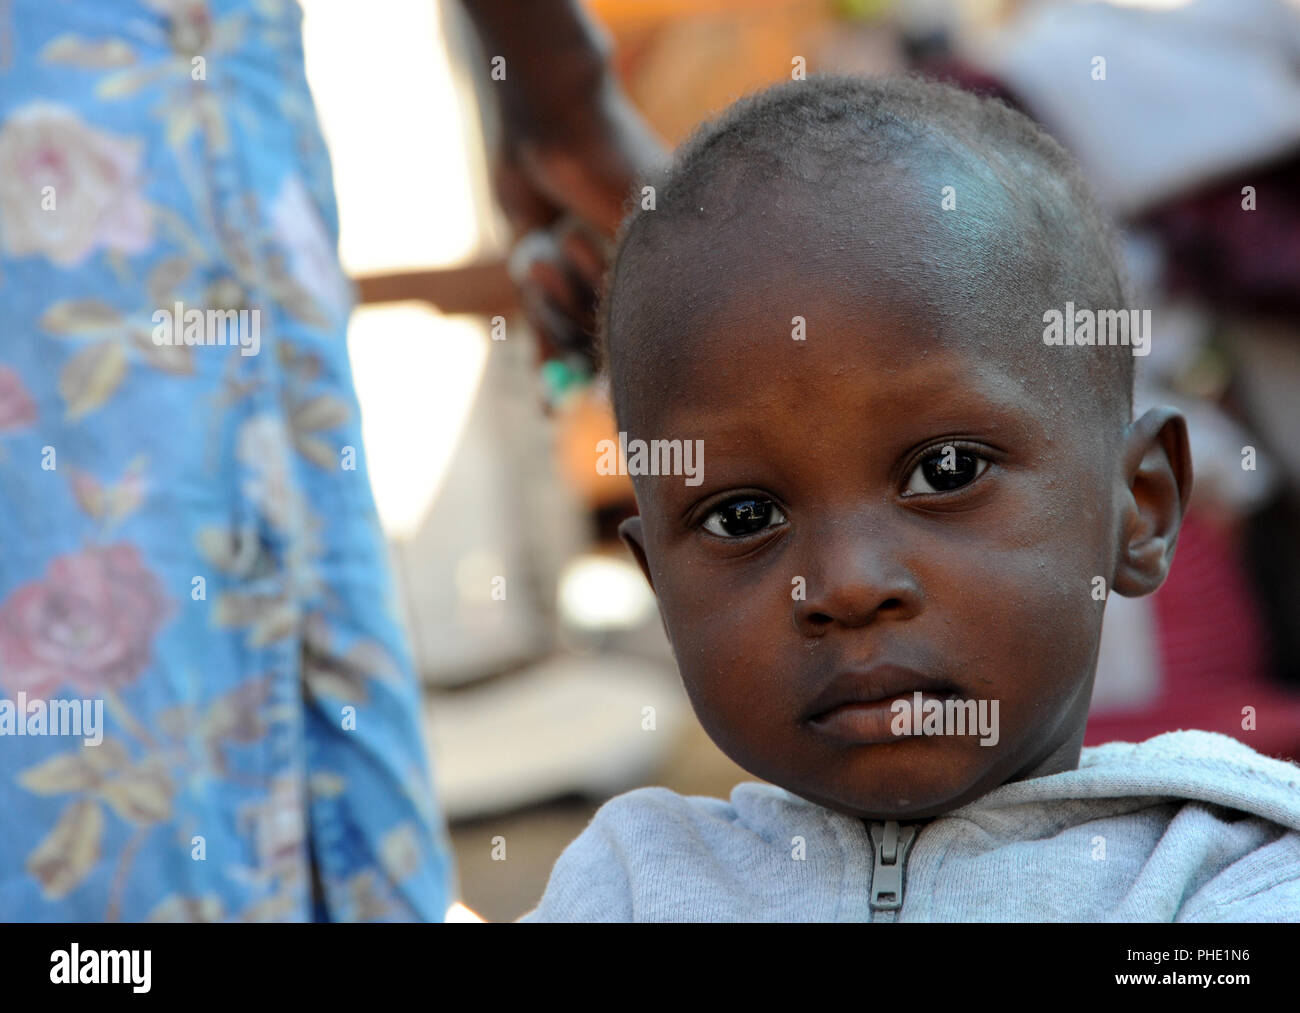 A displaced Haitians child in a tent city near, the Presidential Palace in Port au Prince, Haiti on Jan. 24, 2010. Haiti was devastated by a 7.0 magnitude earthquake on Jan. 12, 2010 Stock Photo